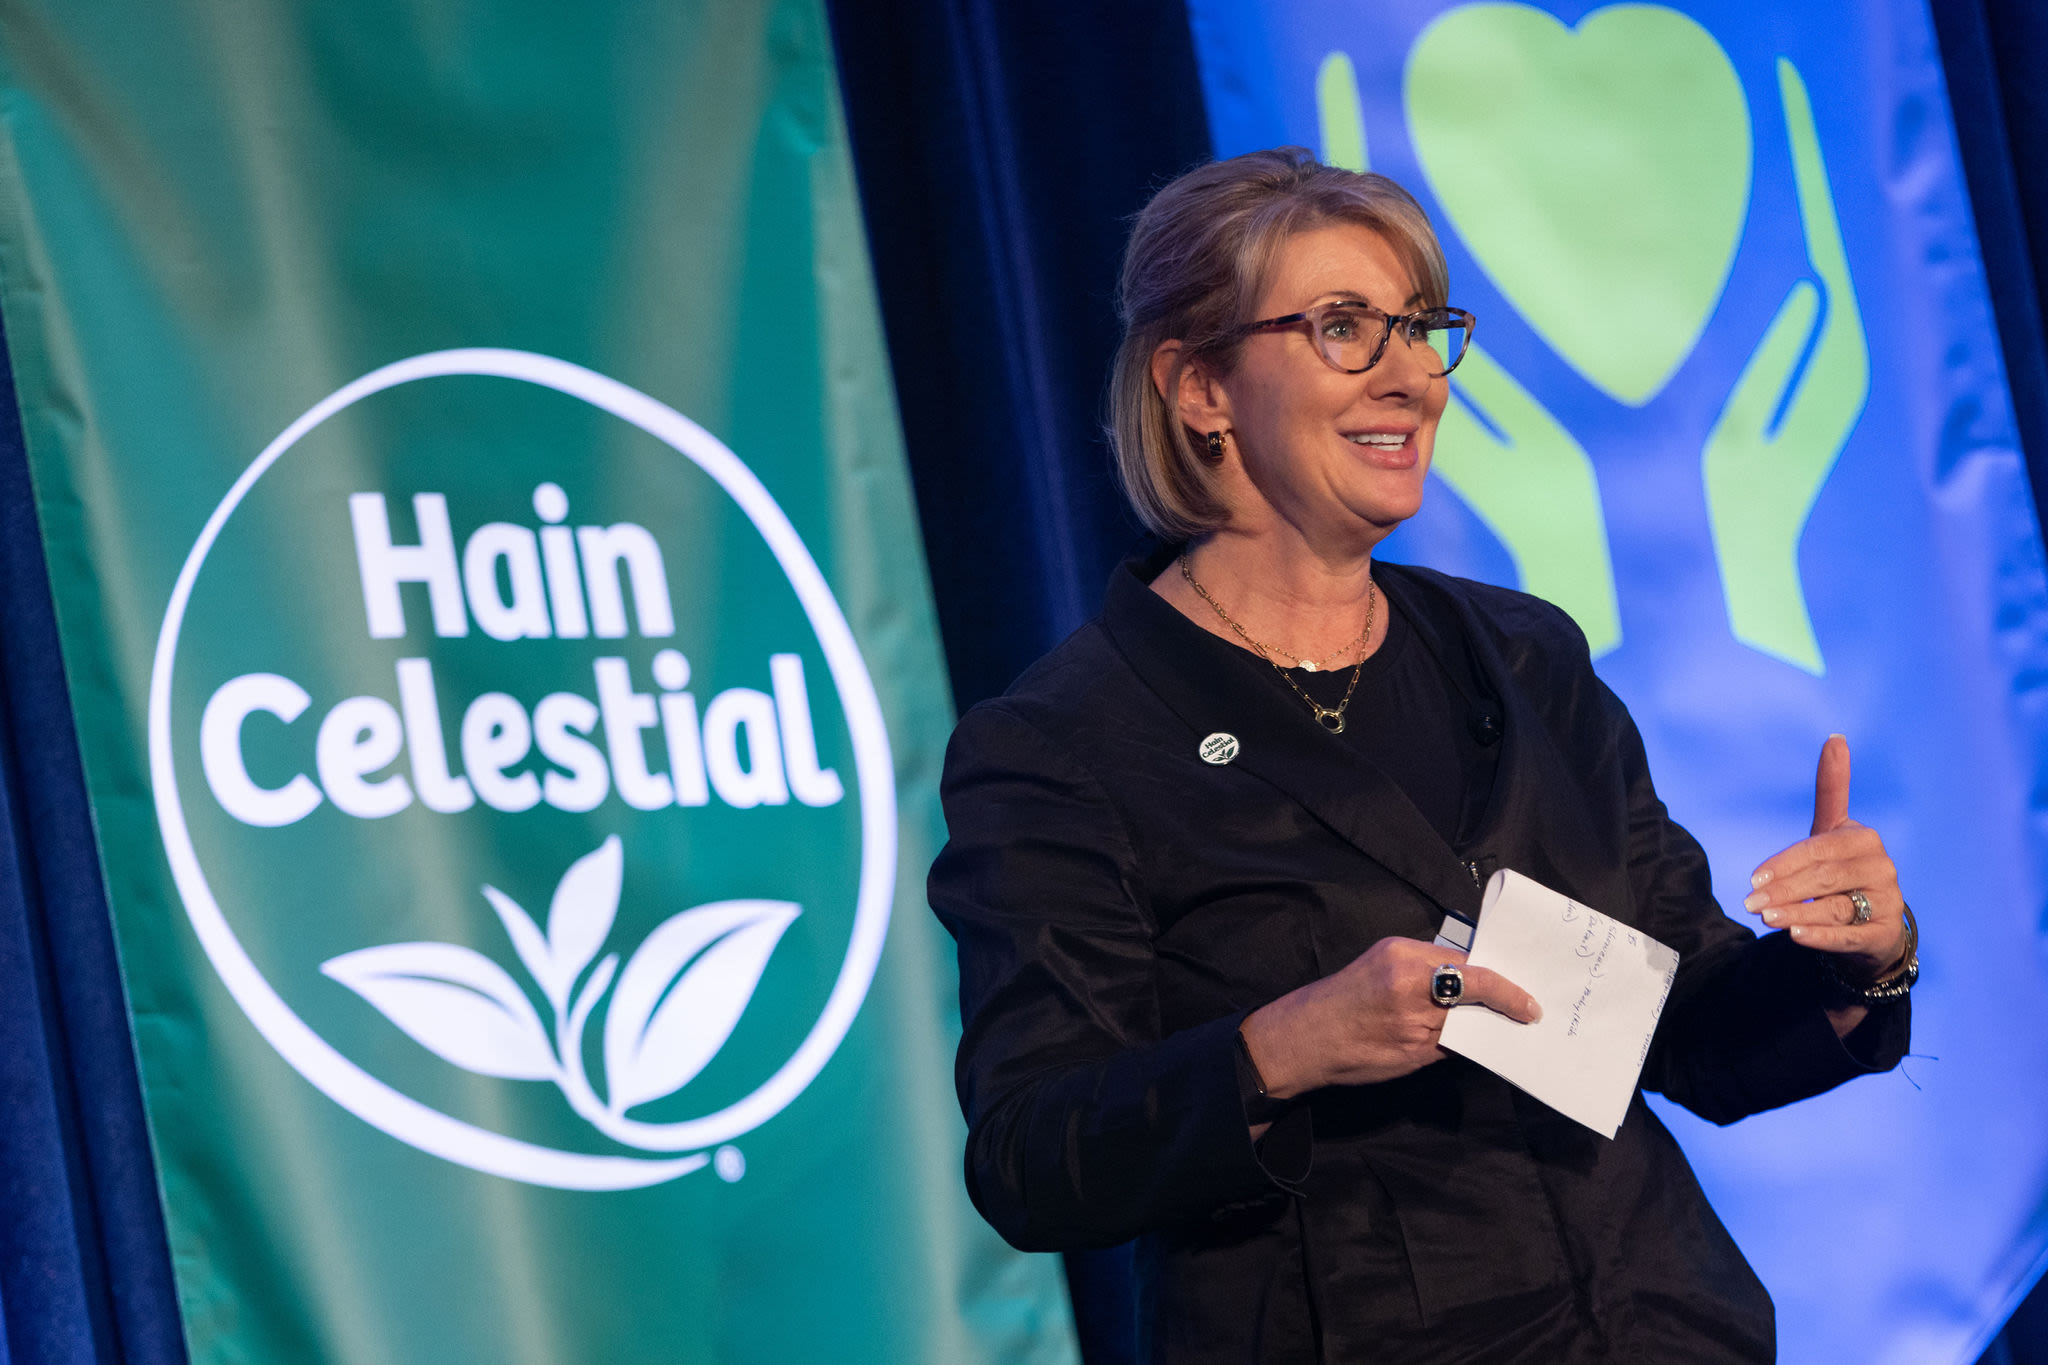 How Hain Celestial's new CEO plans to take Terra chips, Sleepytime tea to the next level